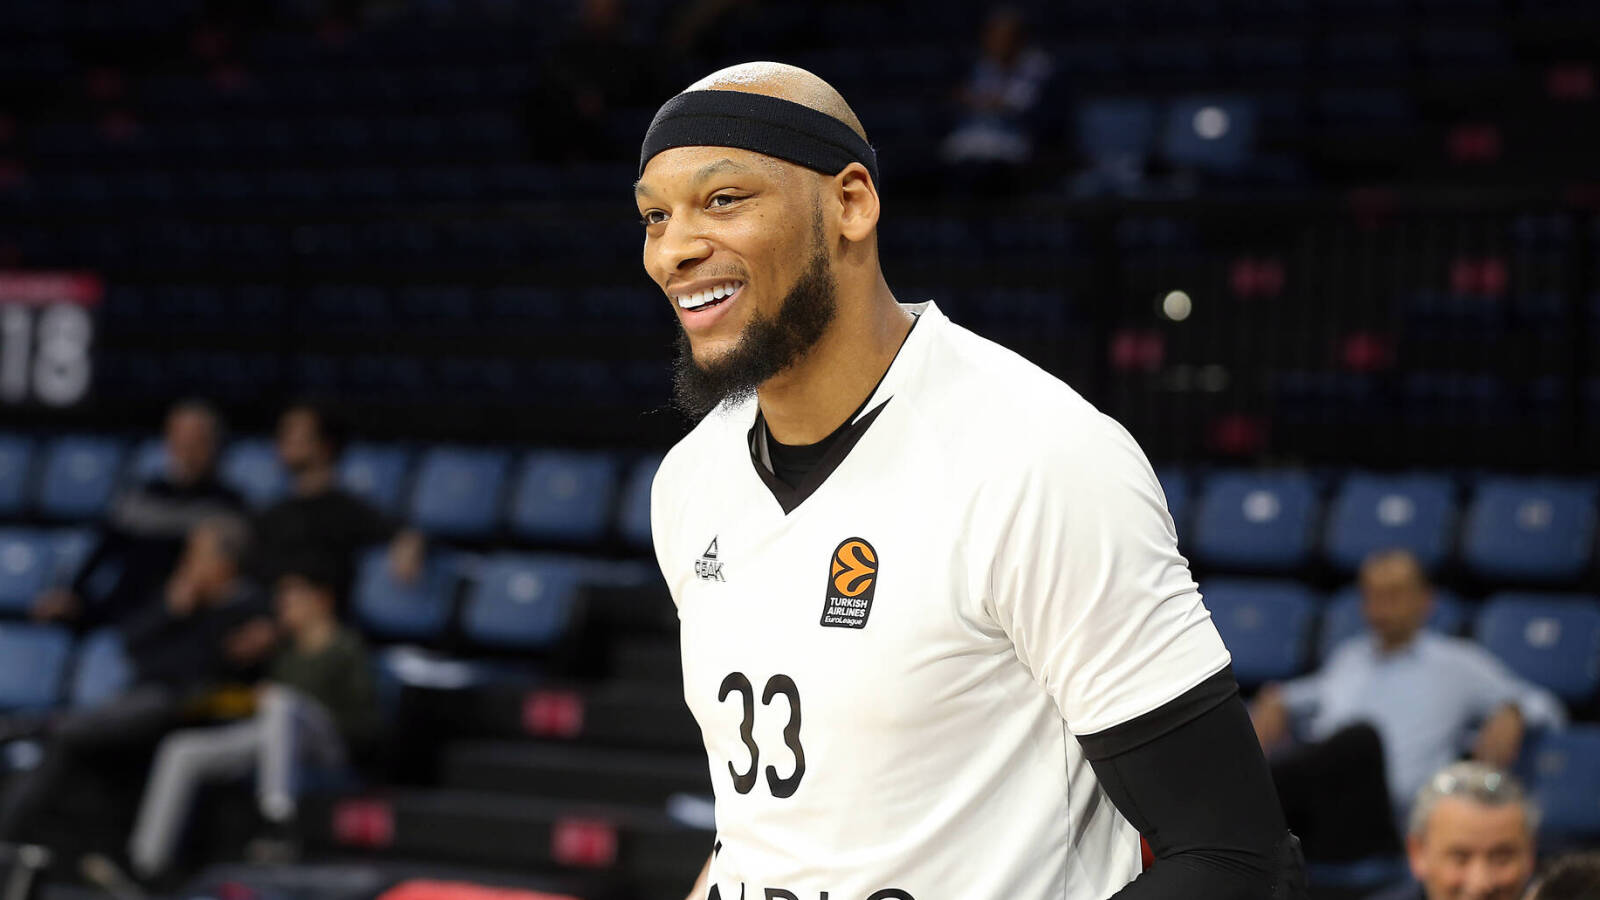 Former NBA player Adreian Payne dies at age 31